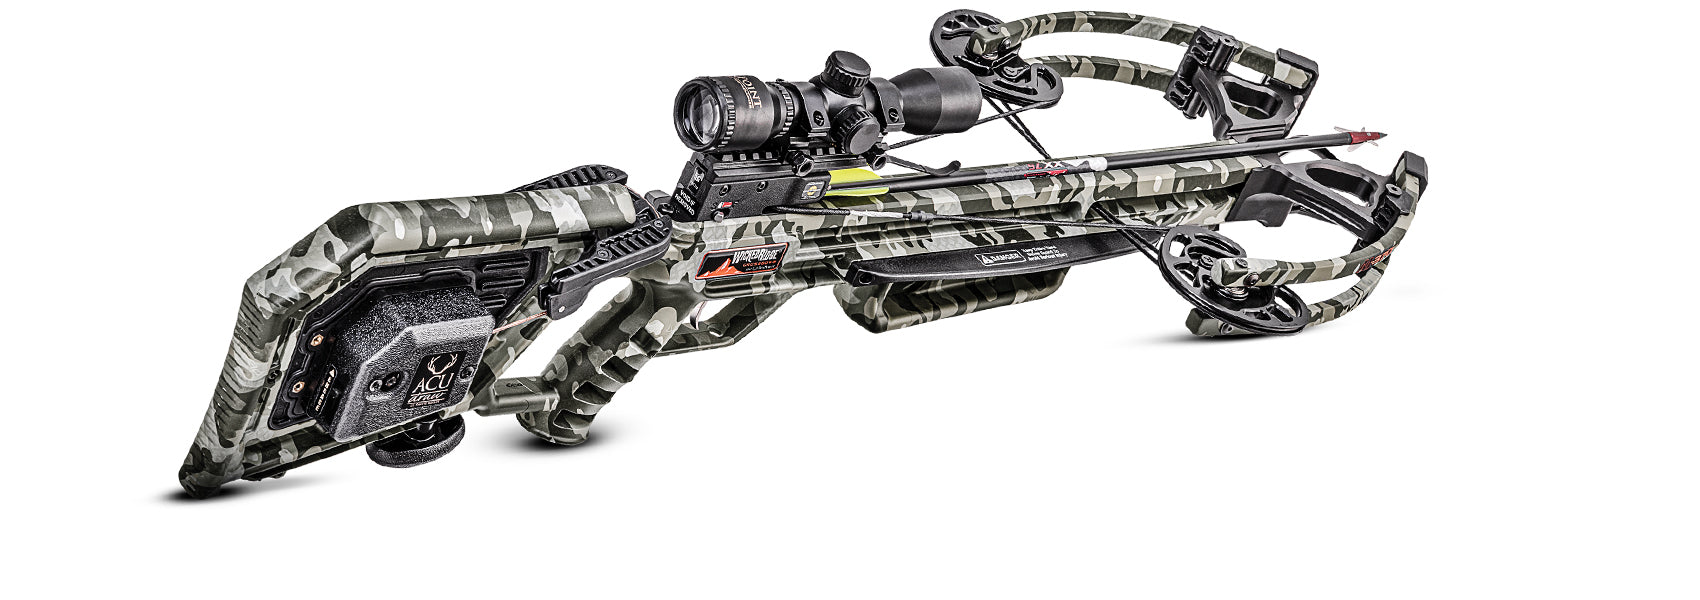 Wicked Ridge® M-370™ Crossbow Package with ACUdraw